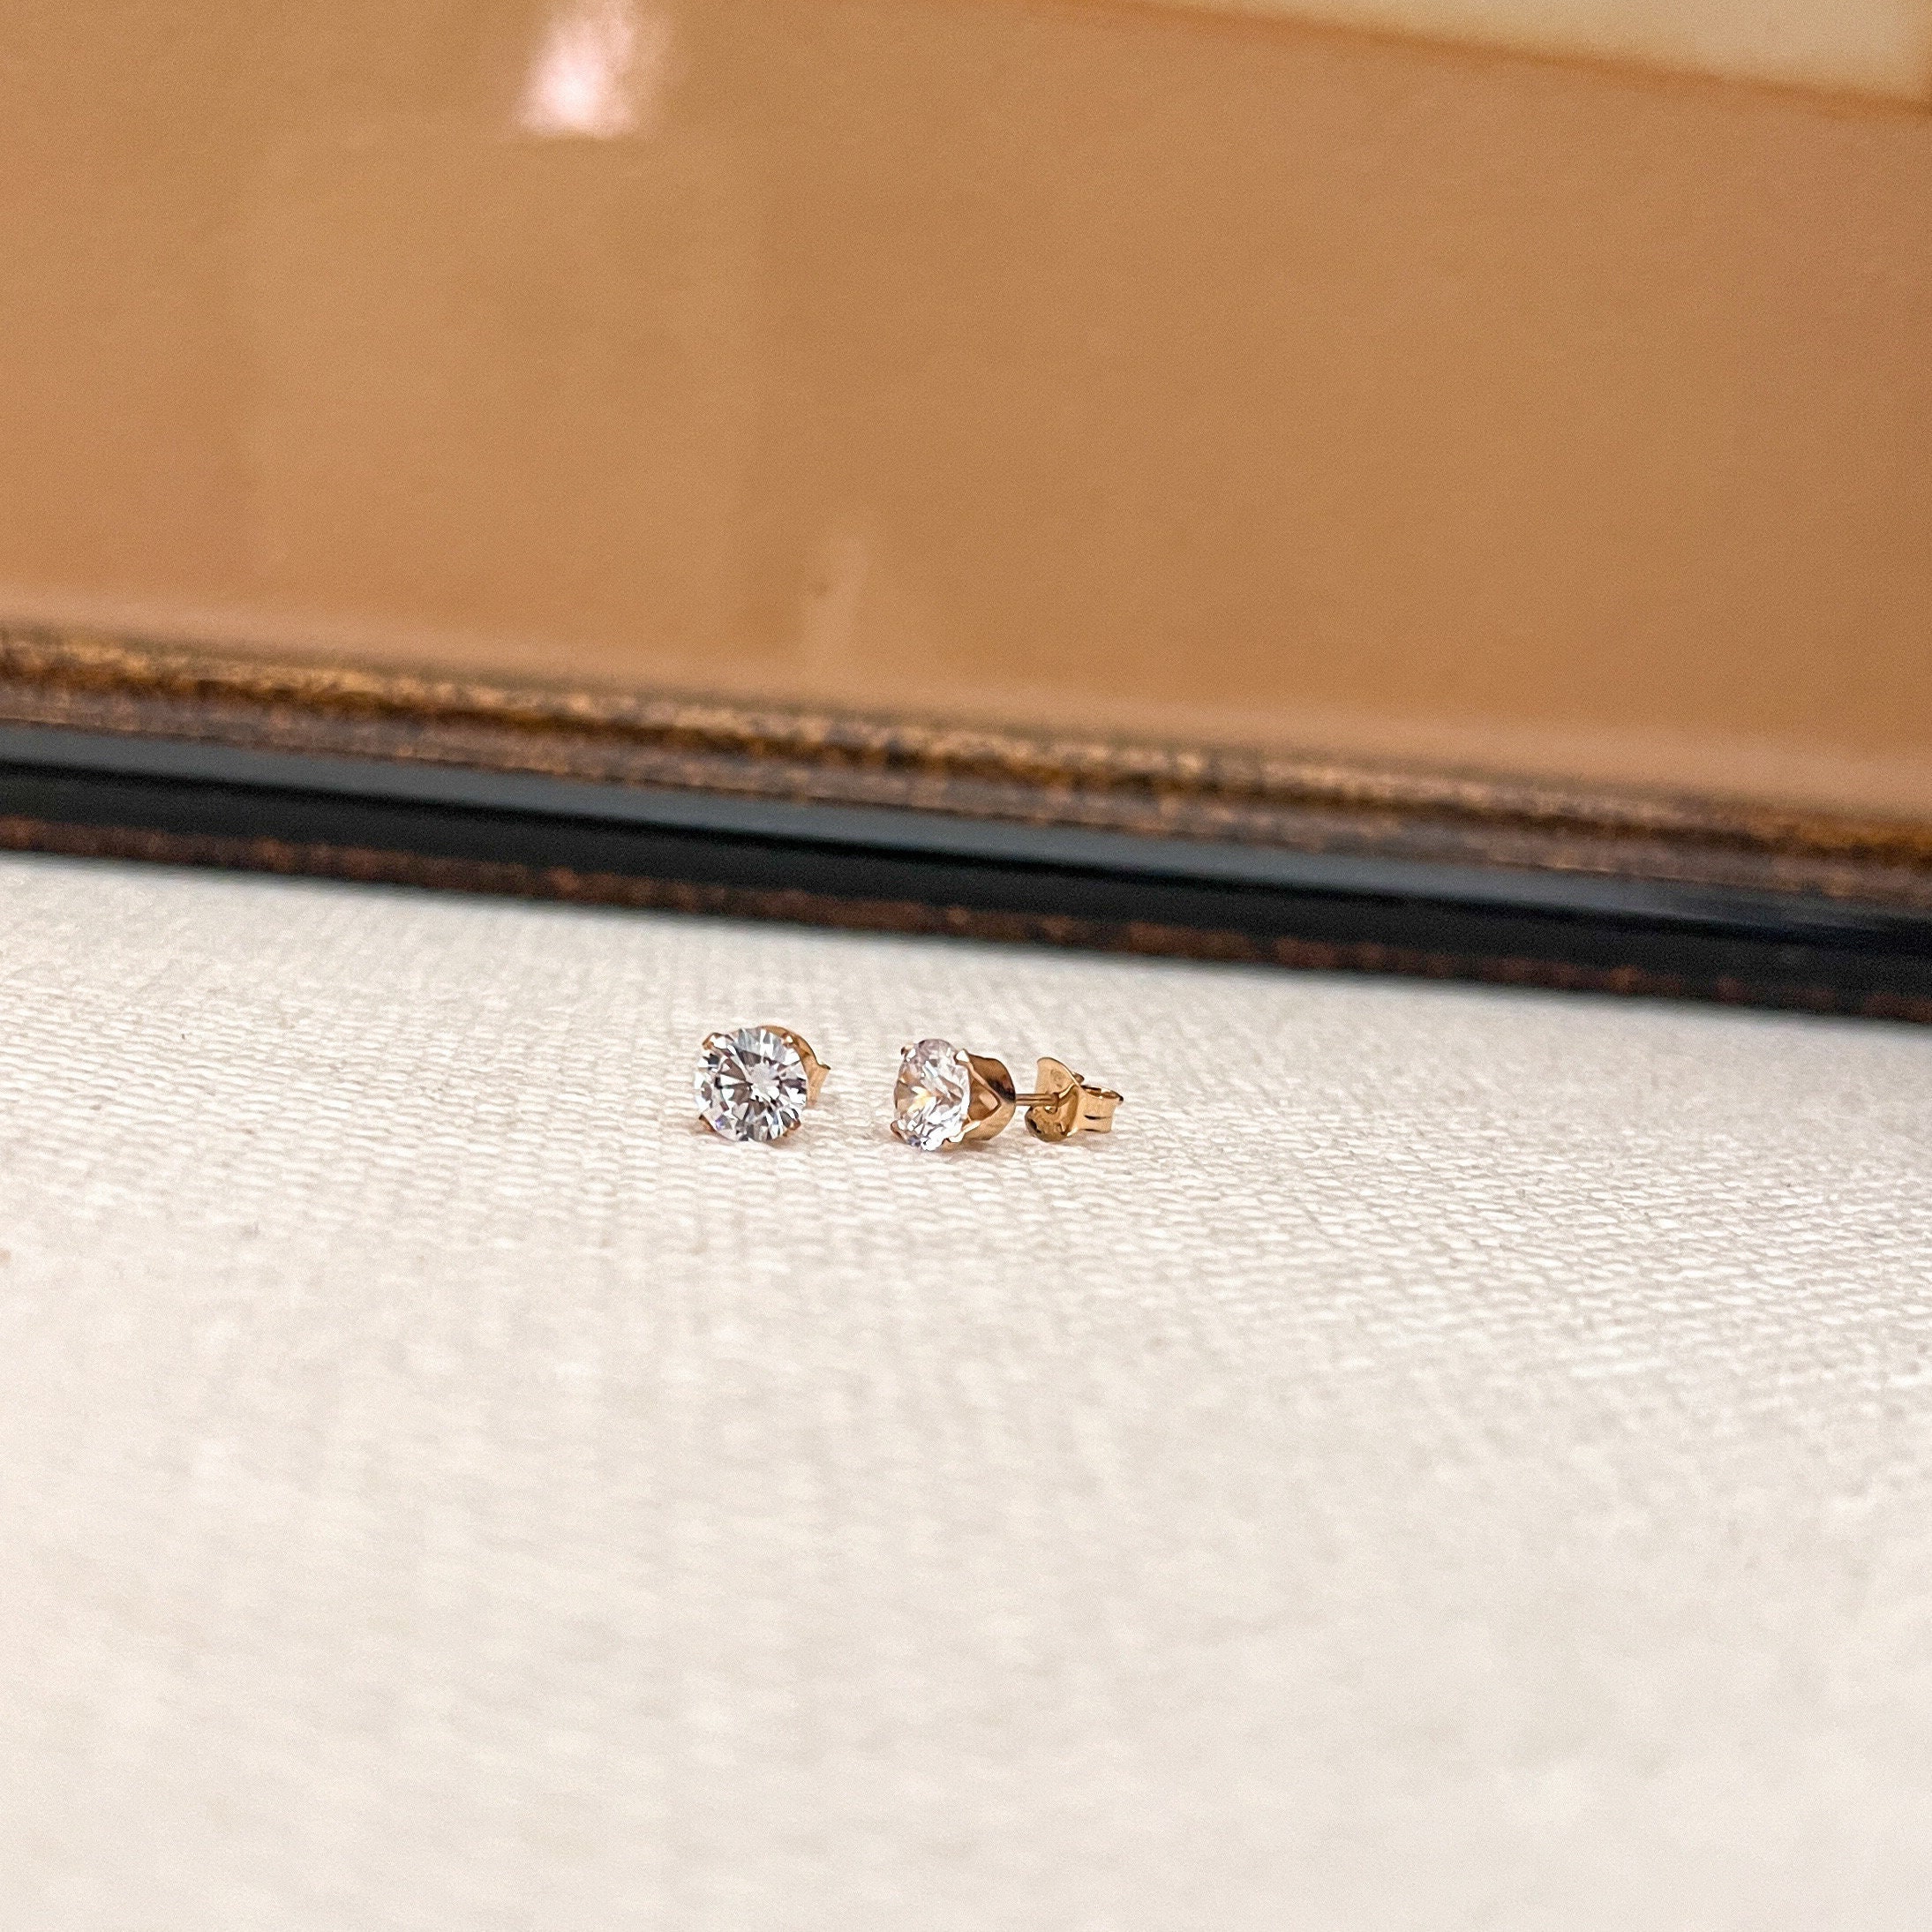 Buy Gold Filled or Silver 6mm Diamond CZ Stud Earrings, Round CZ